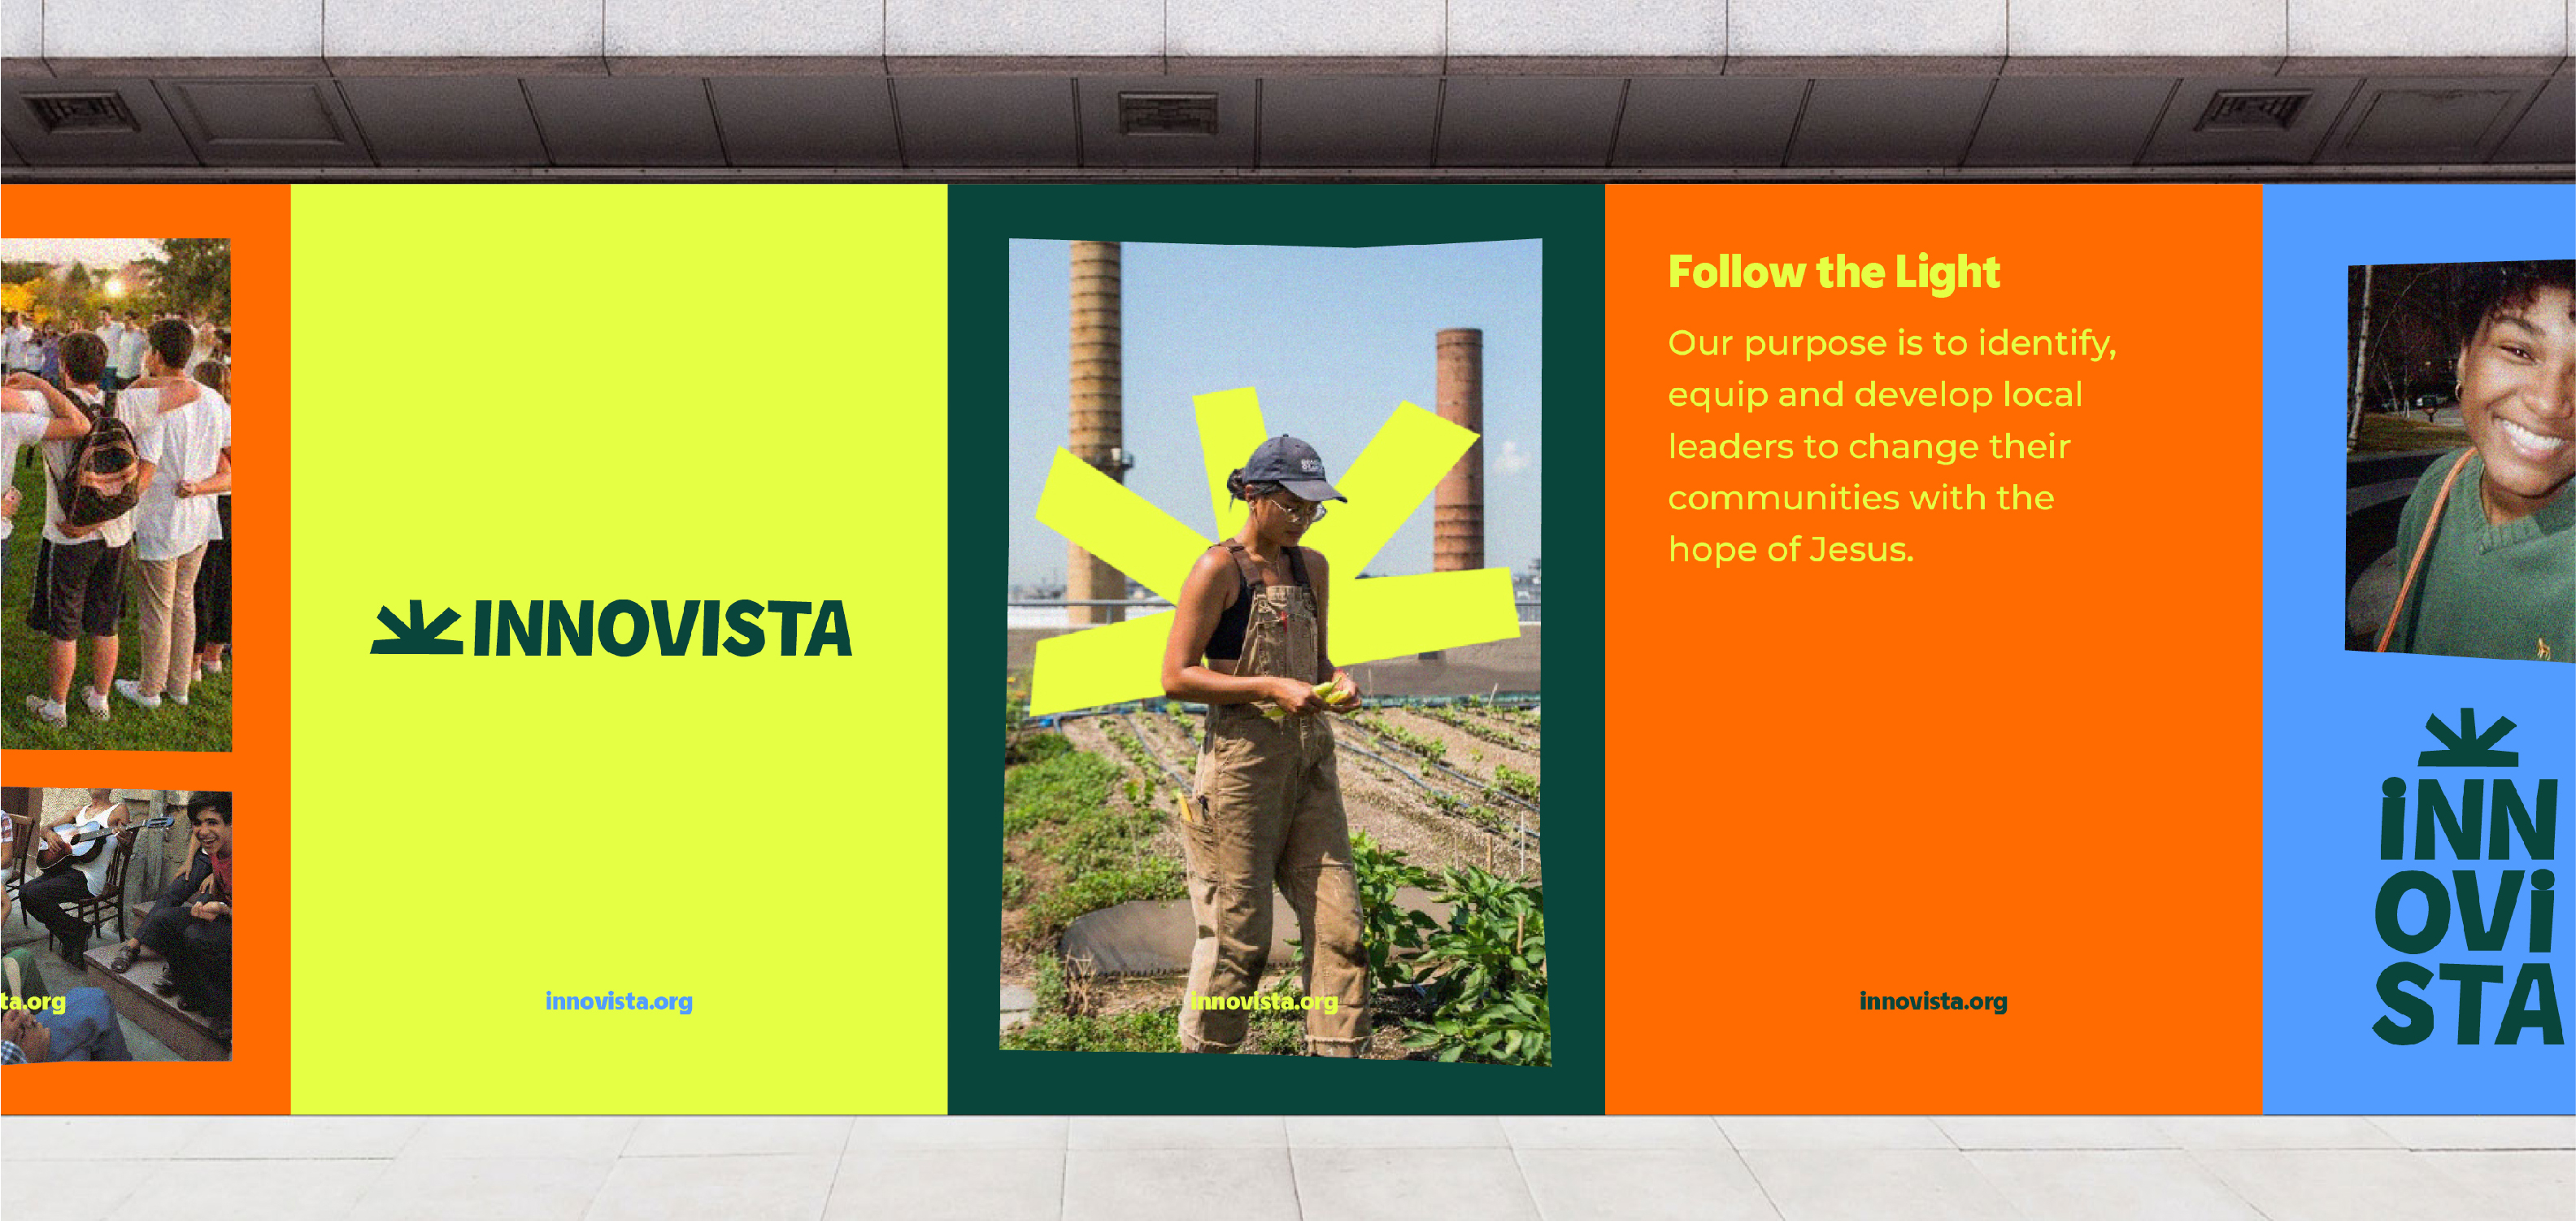 A continuous row of large Innovista posters showing the colourful branding with authentic photos of their charity leaders, highlighted by a sunrise icon. One shows the statement: Follow the light. Our purpose is to identify, equip and develop local leaders to change their communities with the hope of Jesus.